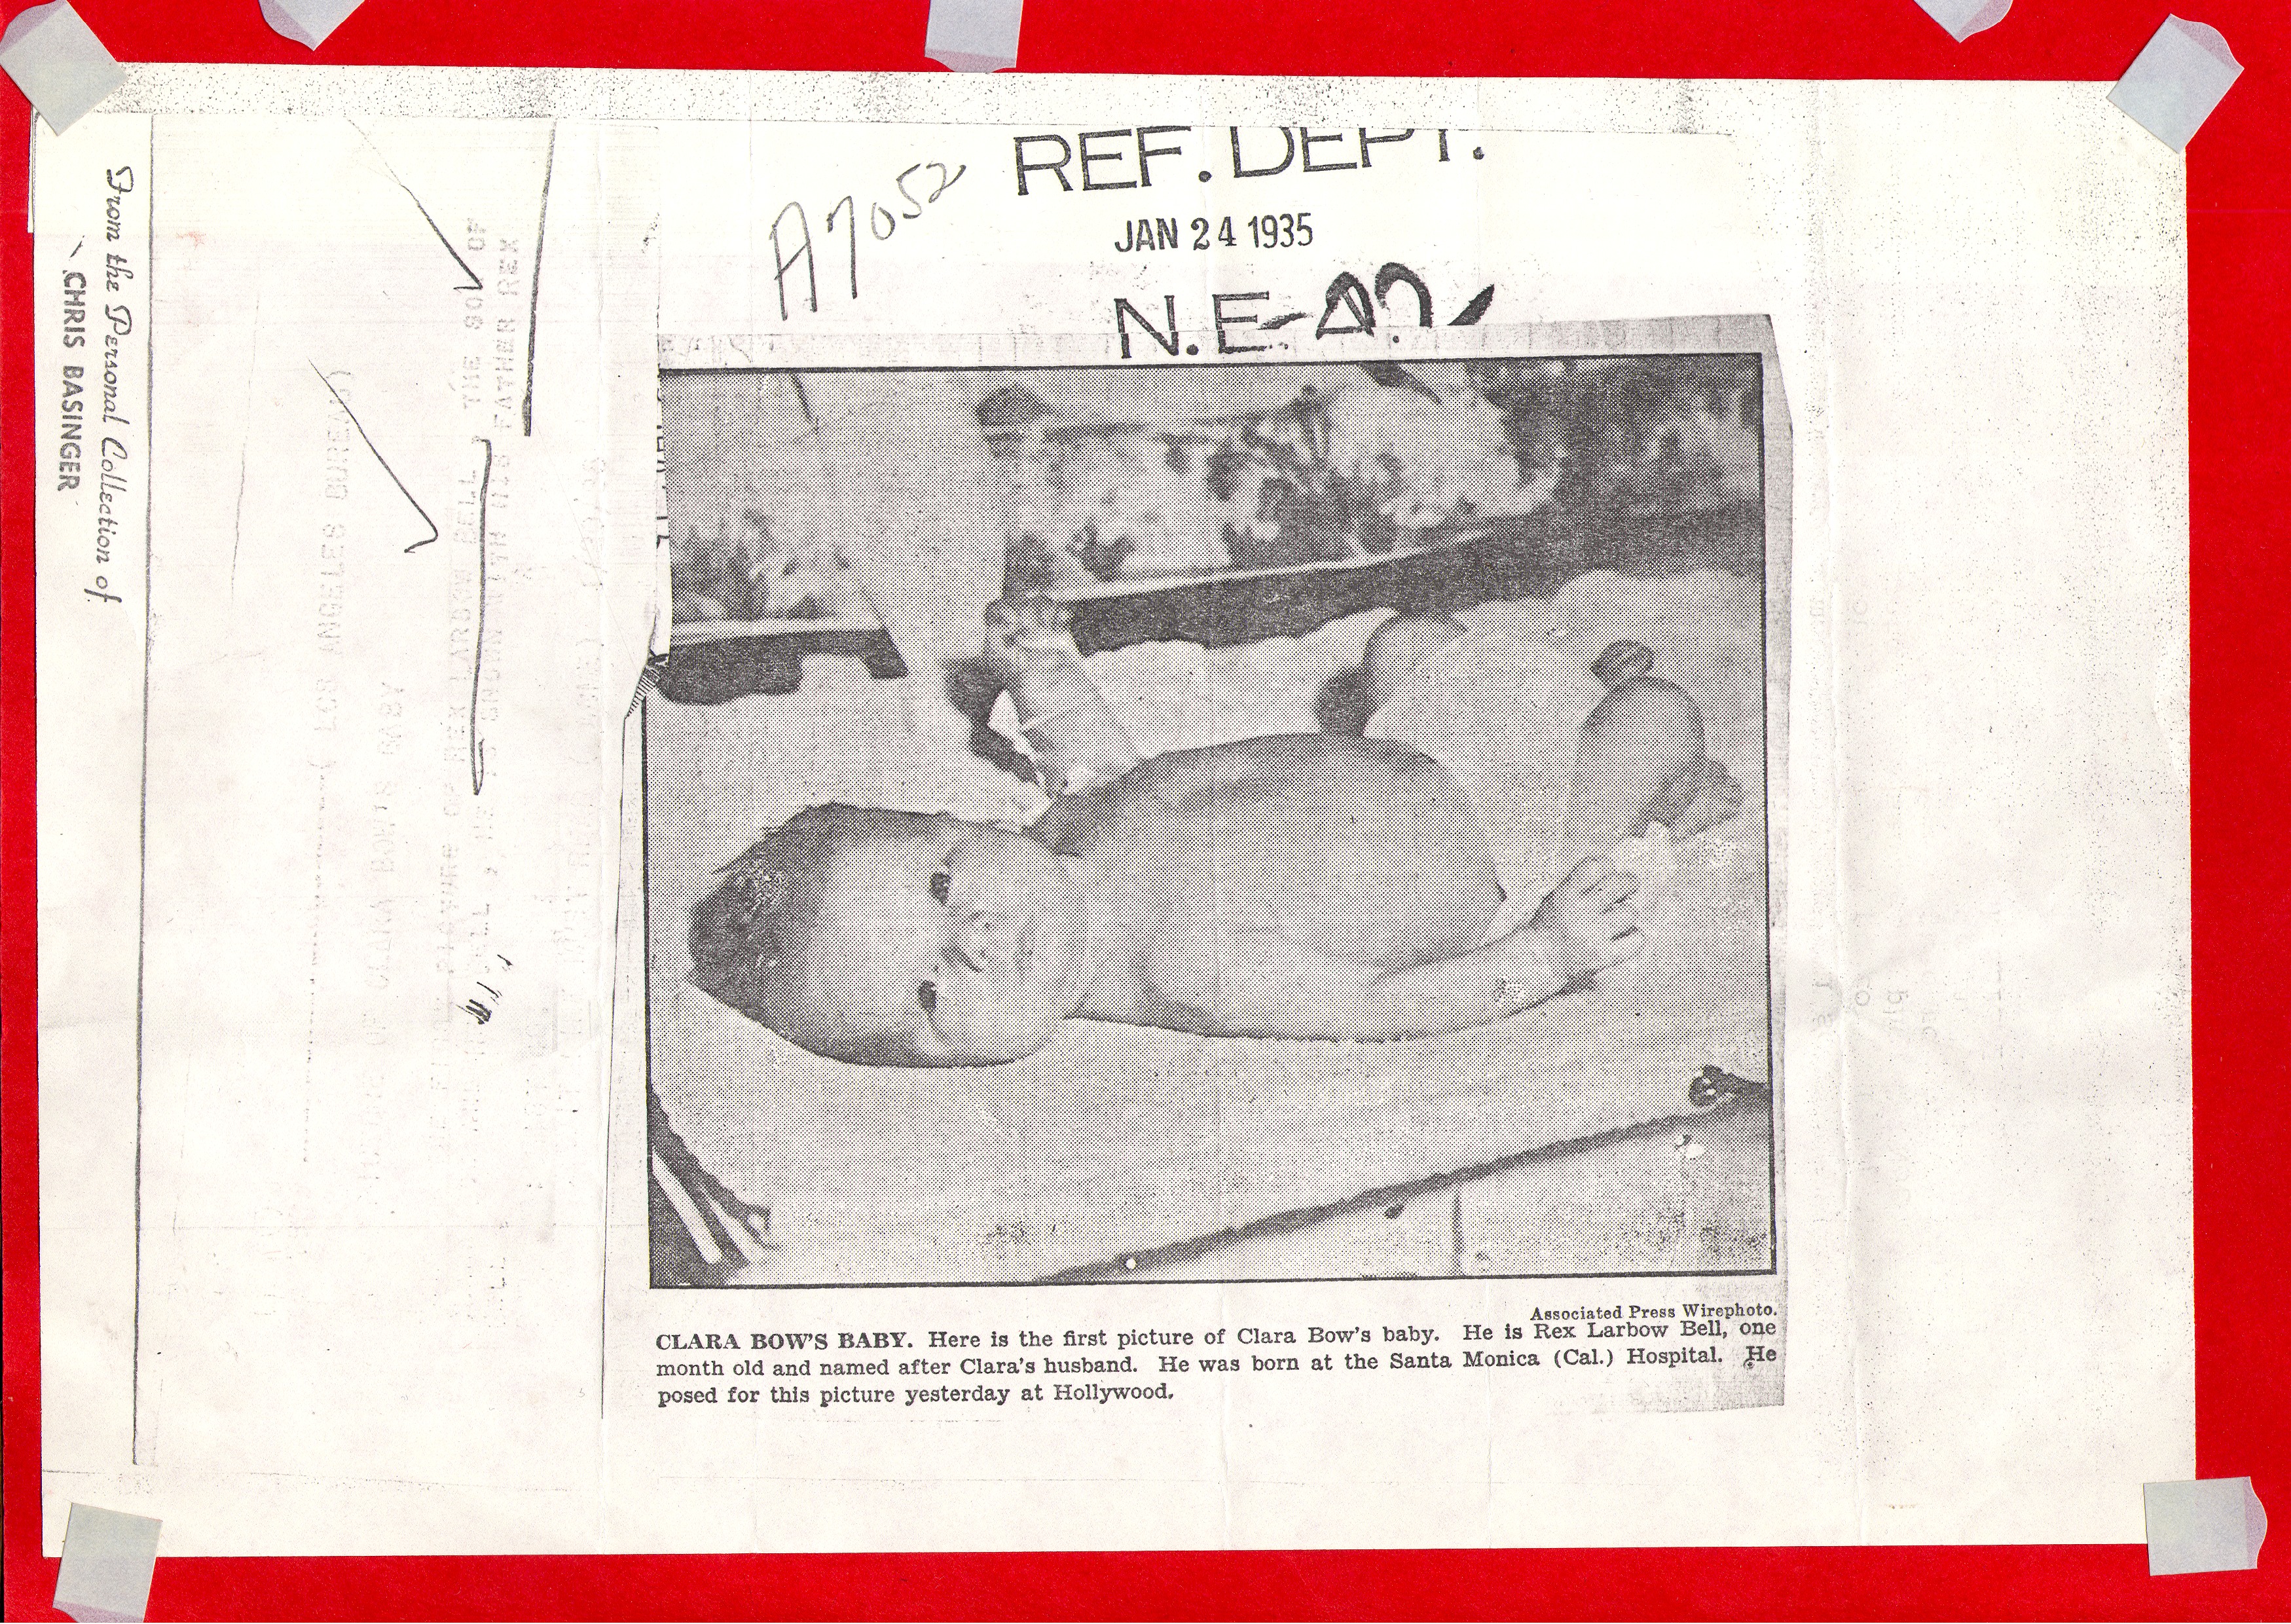 First picture of Rex Larbow Bell, one month old Taken from a newspaper dated Jan. 24, 1935: photographic print